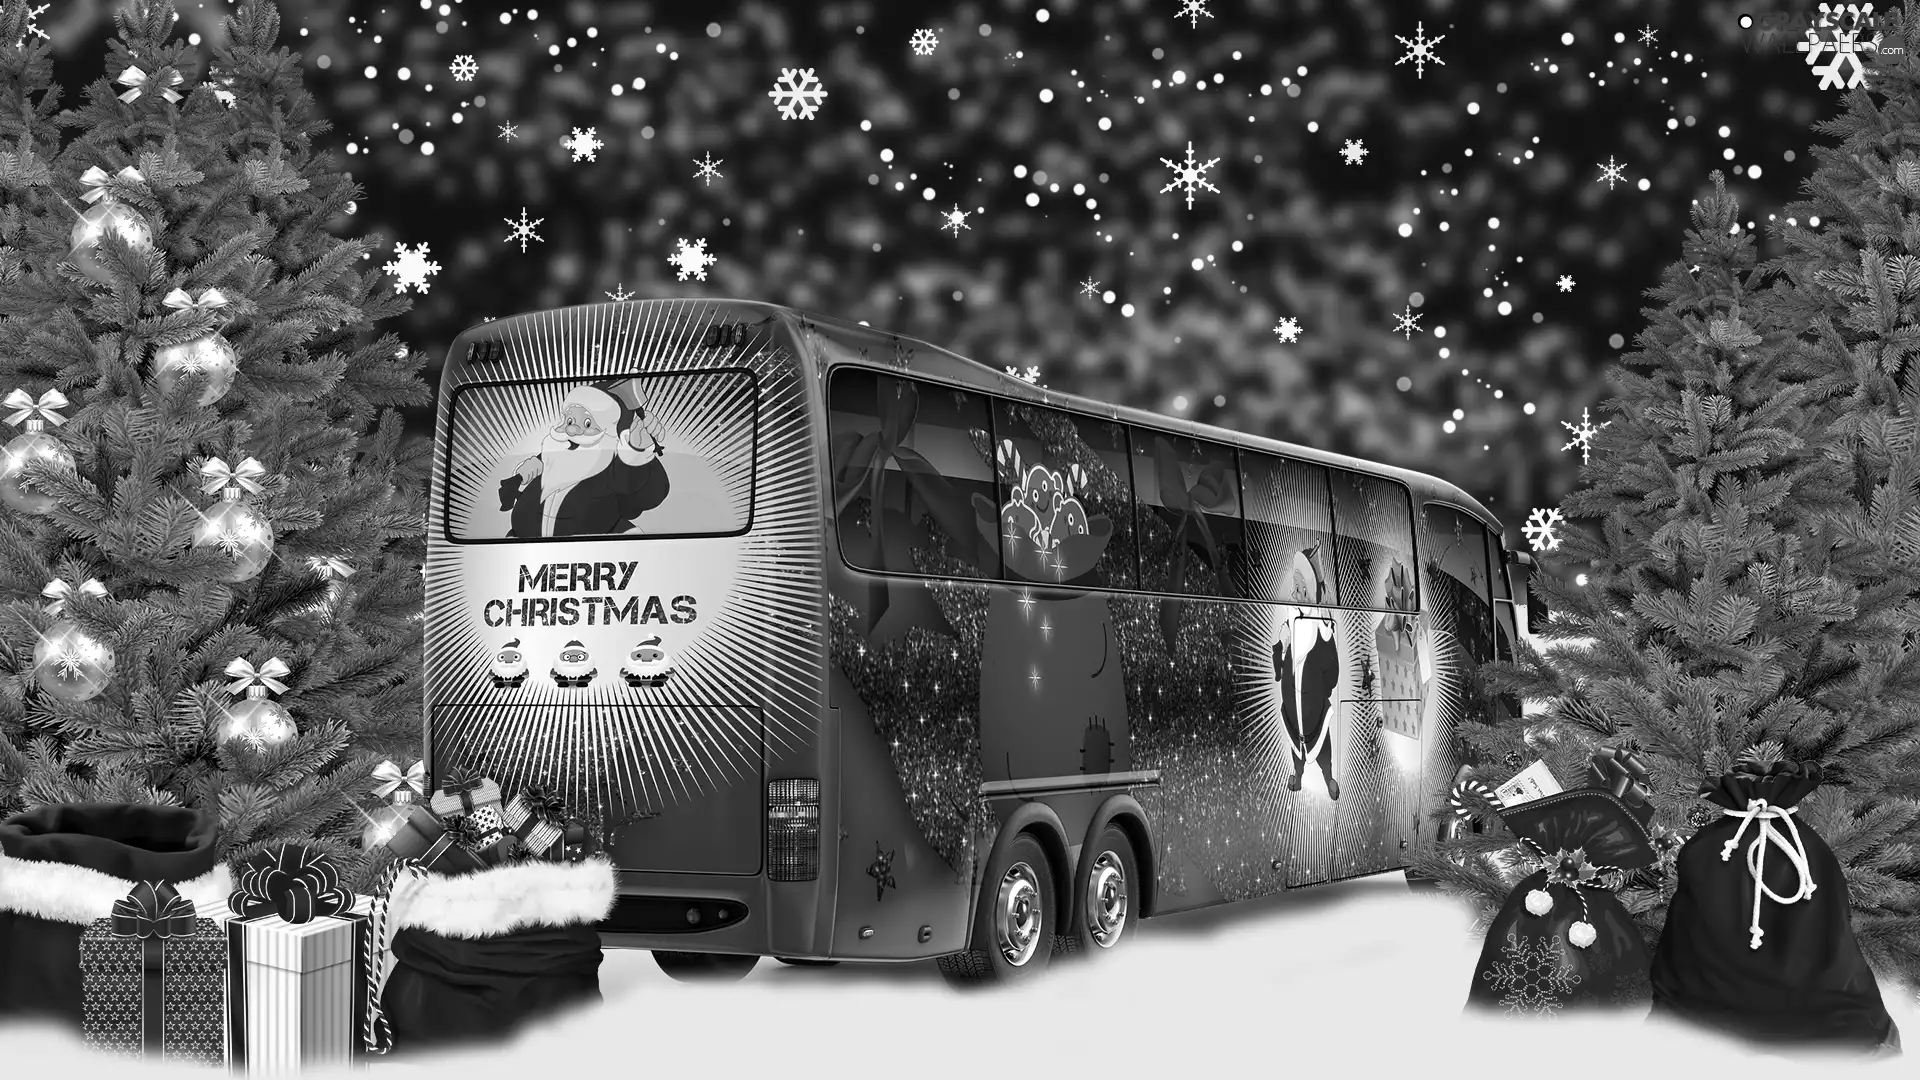 viewes, bus, gifts, trees, festive, christmas tree, graphics